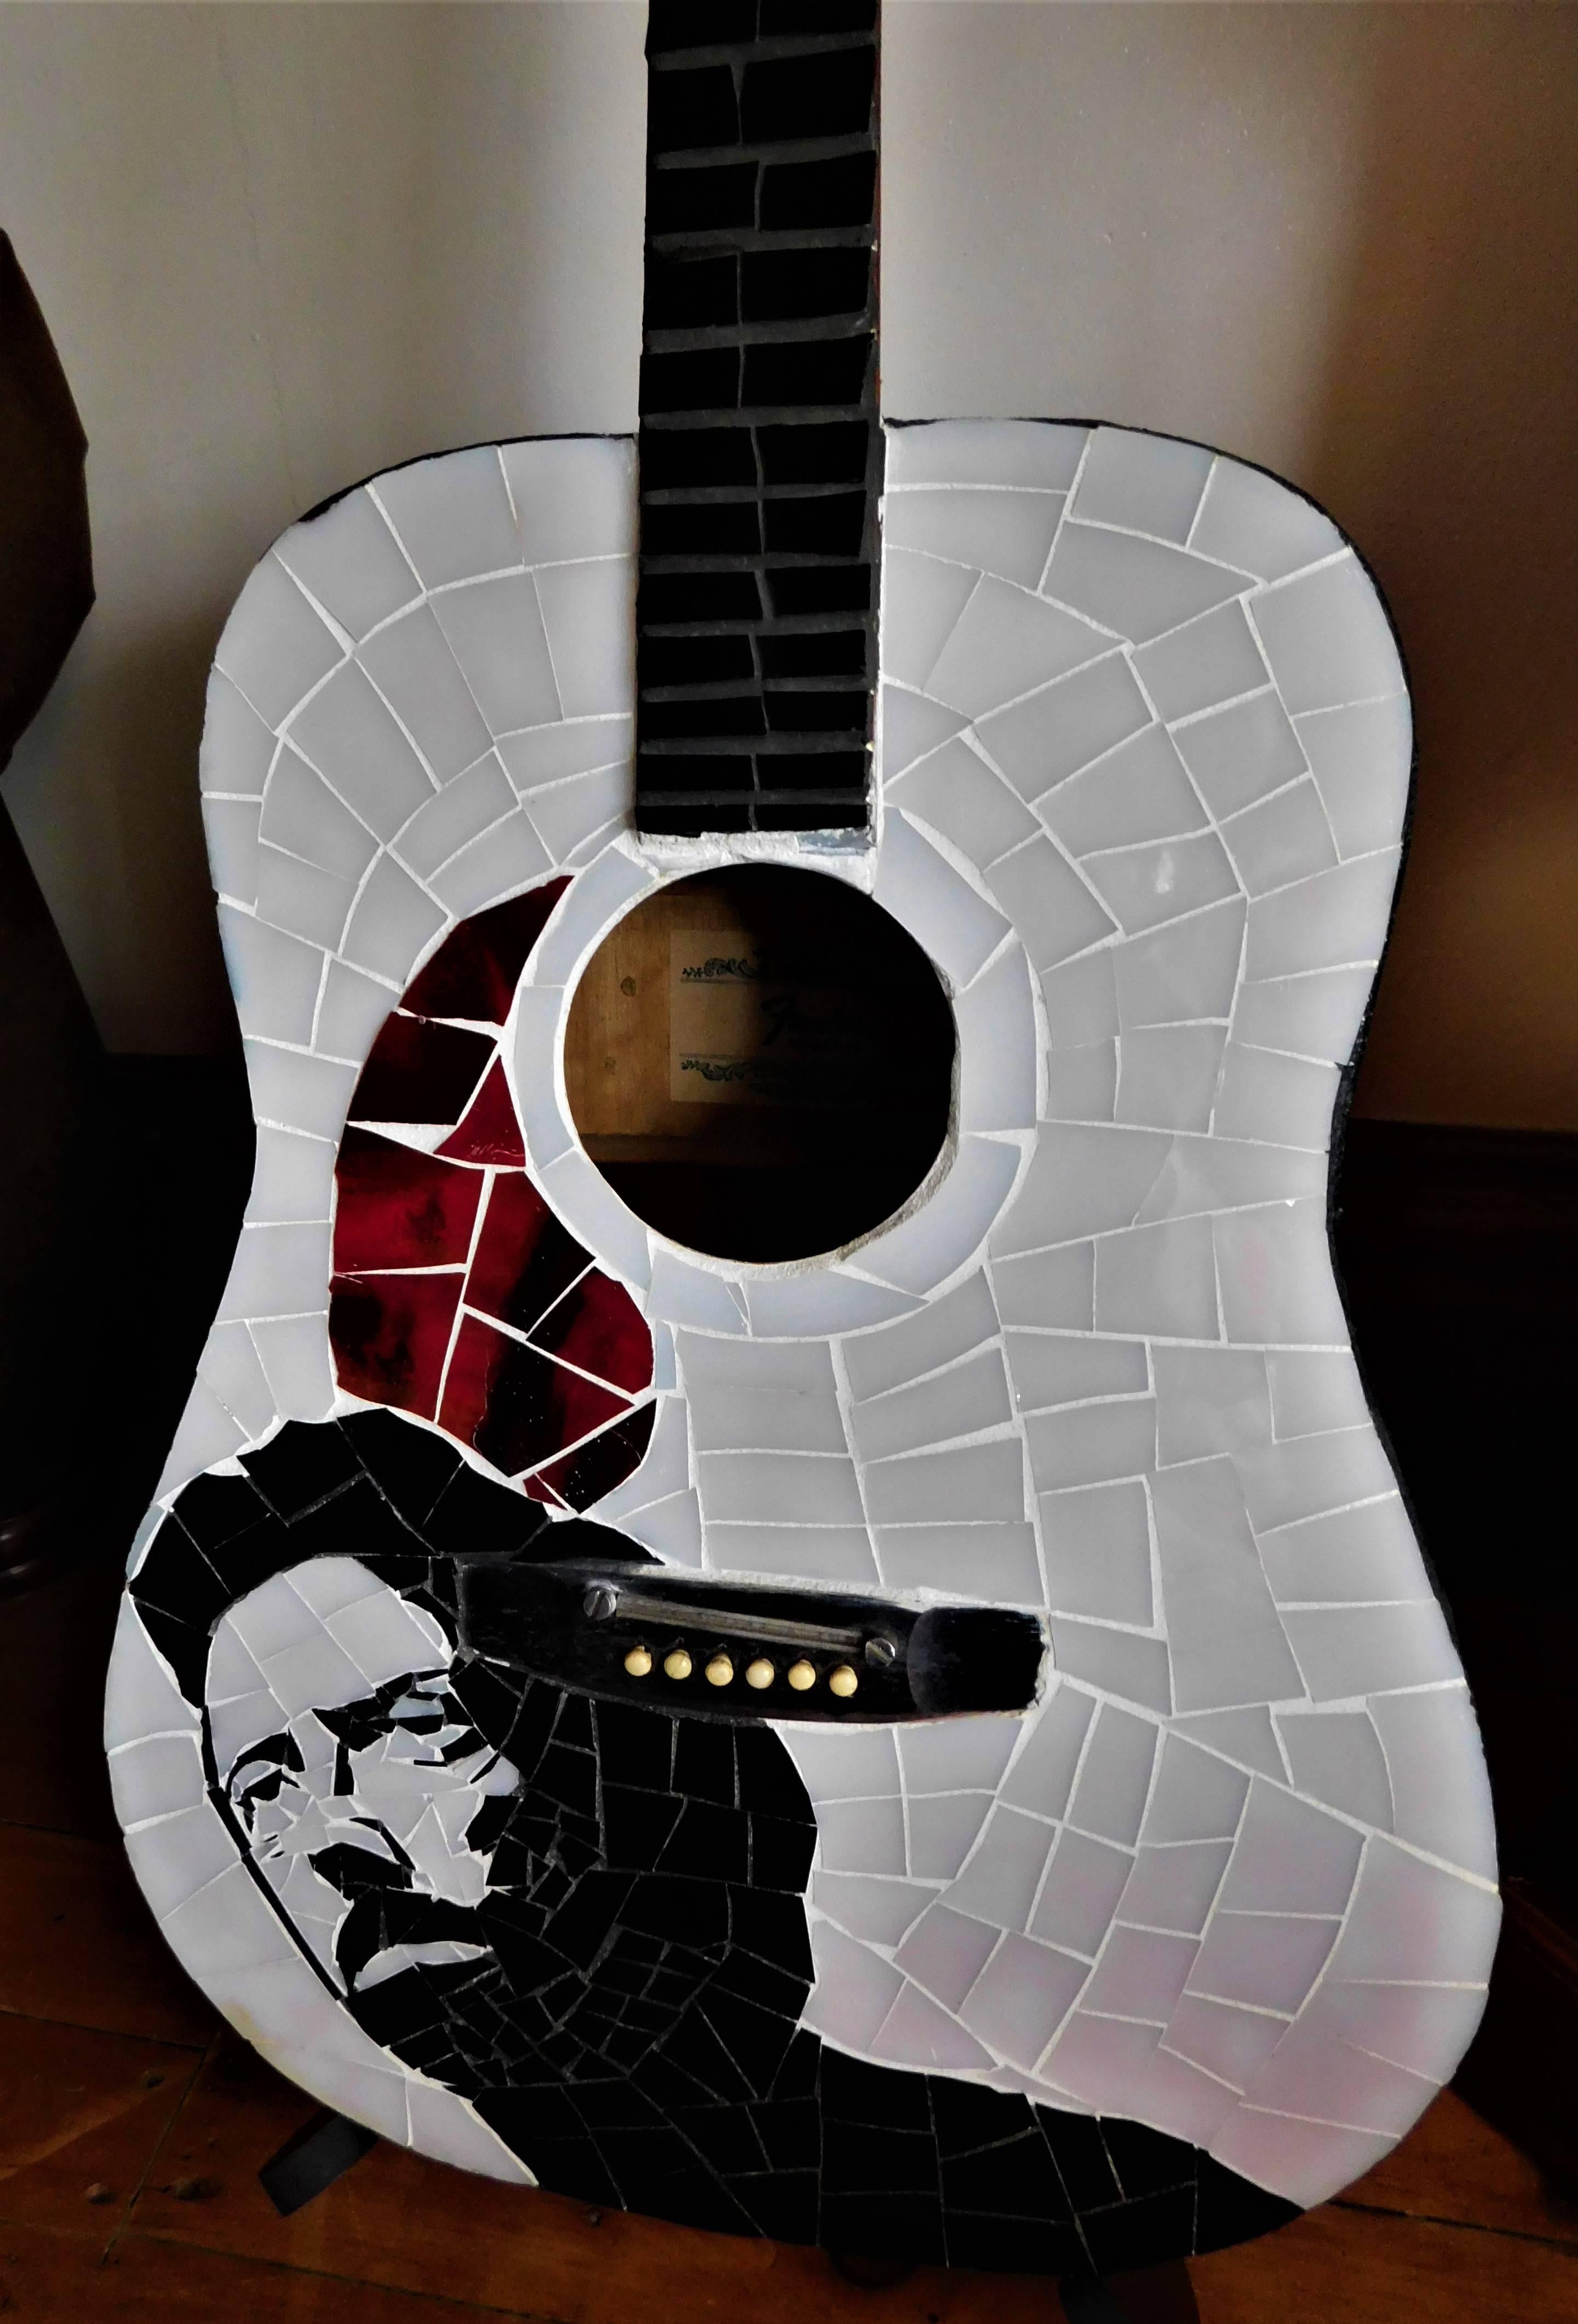 This Eric Clapton stained glass acoustic guitar was created by Brantford, Ontario, Canada artist Lily Crawford in 2012, signed on the back. The neck has black stained glass all the way up it and the sides and back are covered with gold leaf. It can